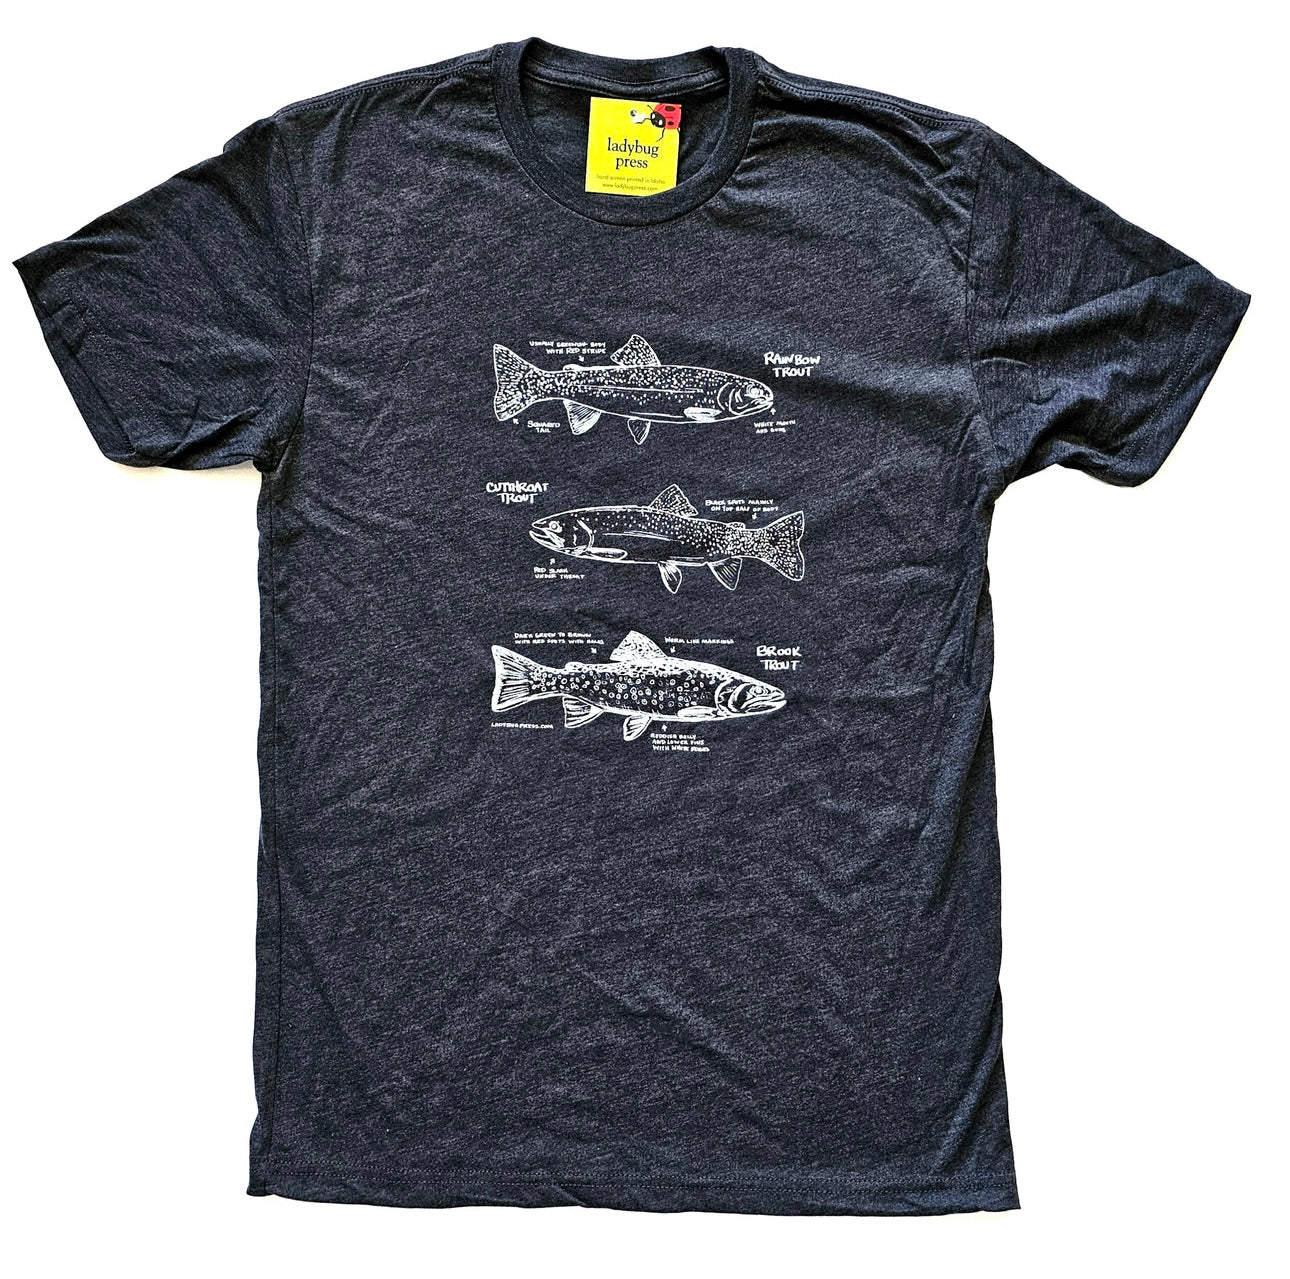 Trout T-shirt, screen printed adult sizes